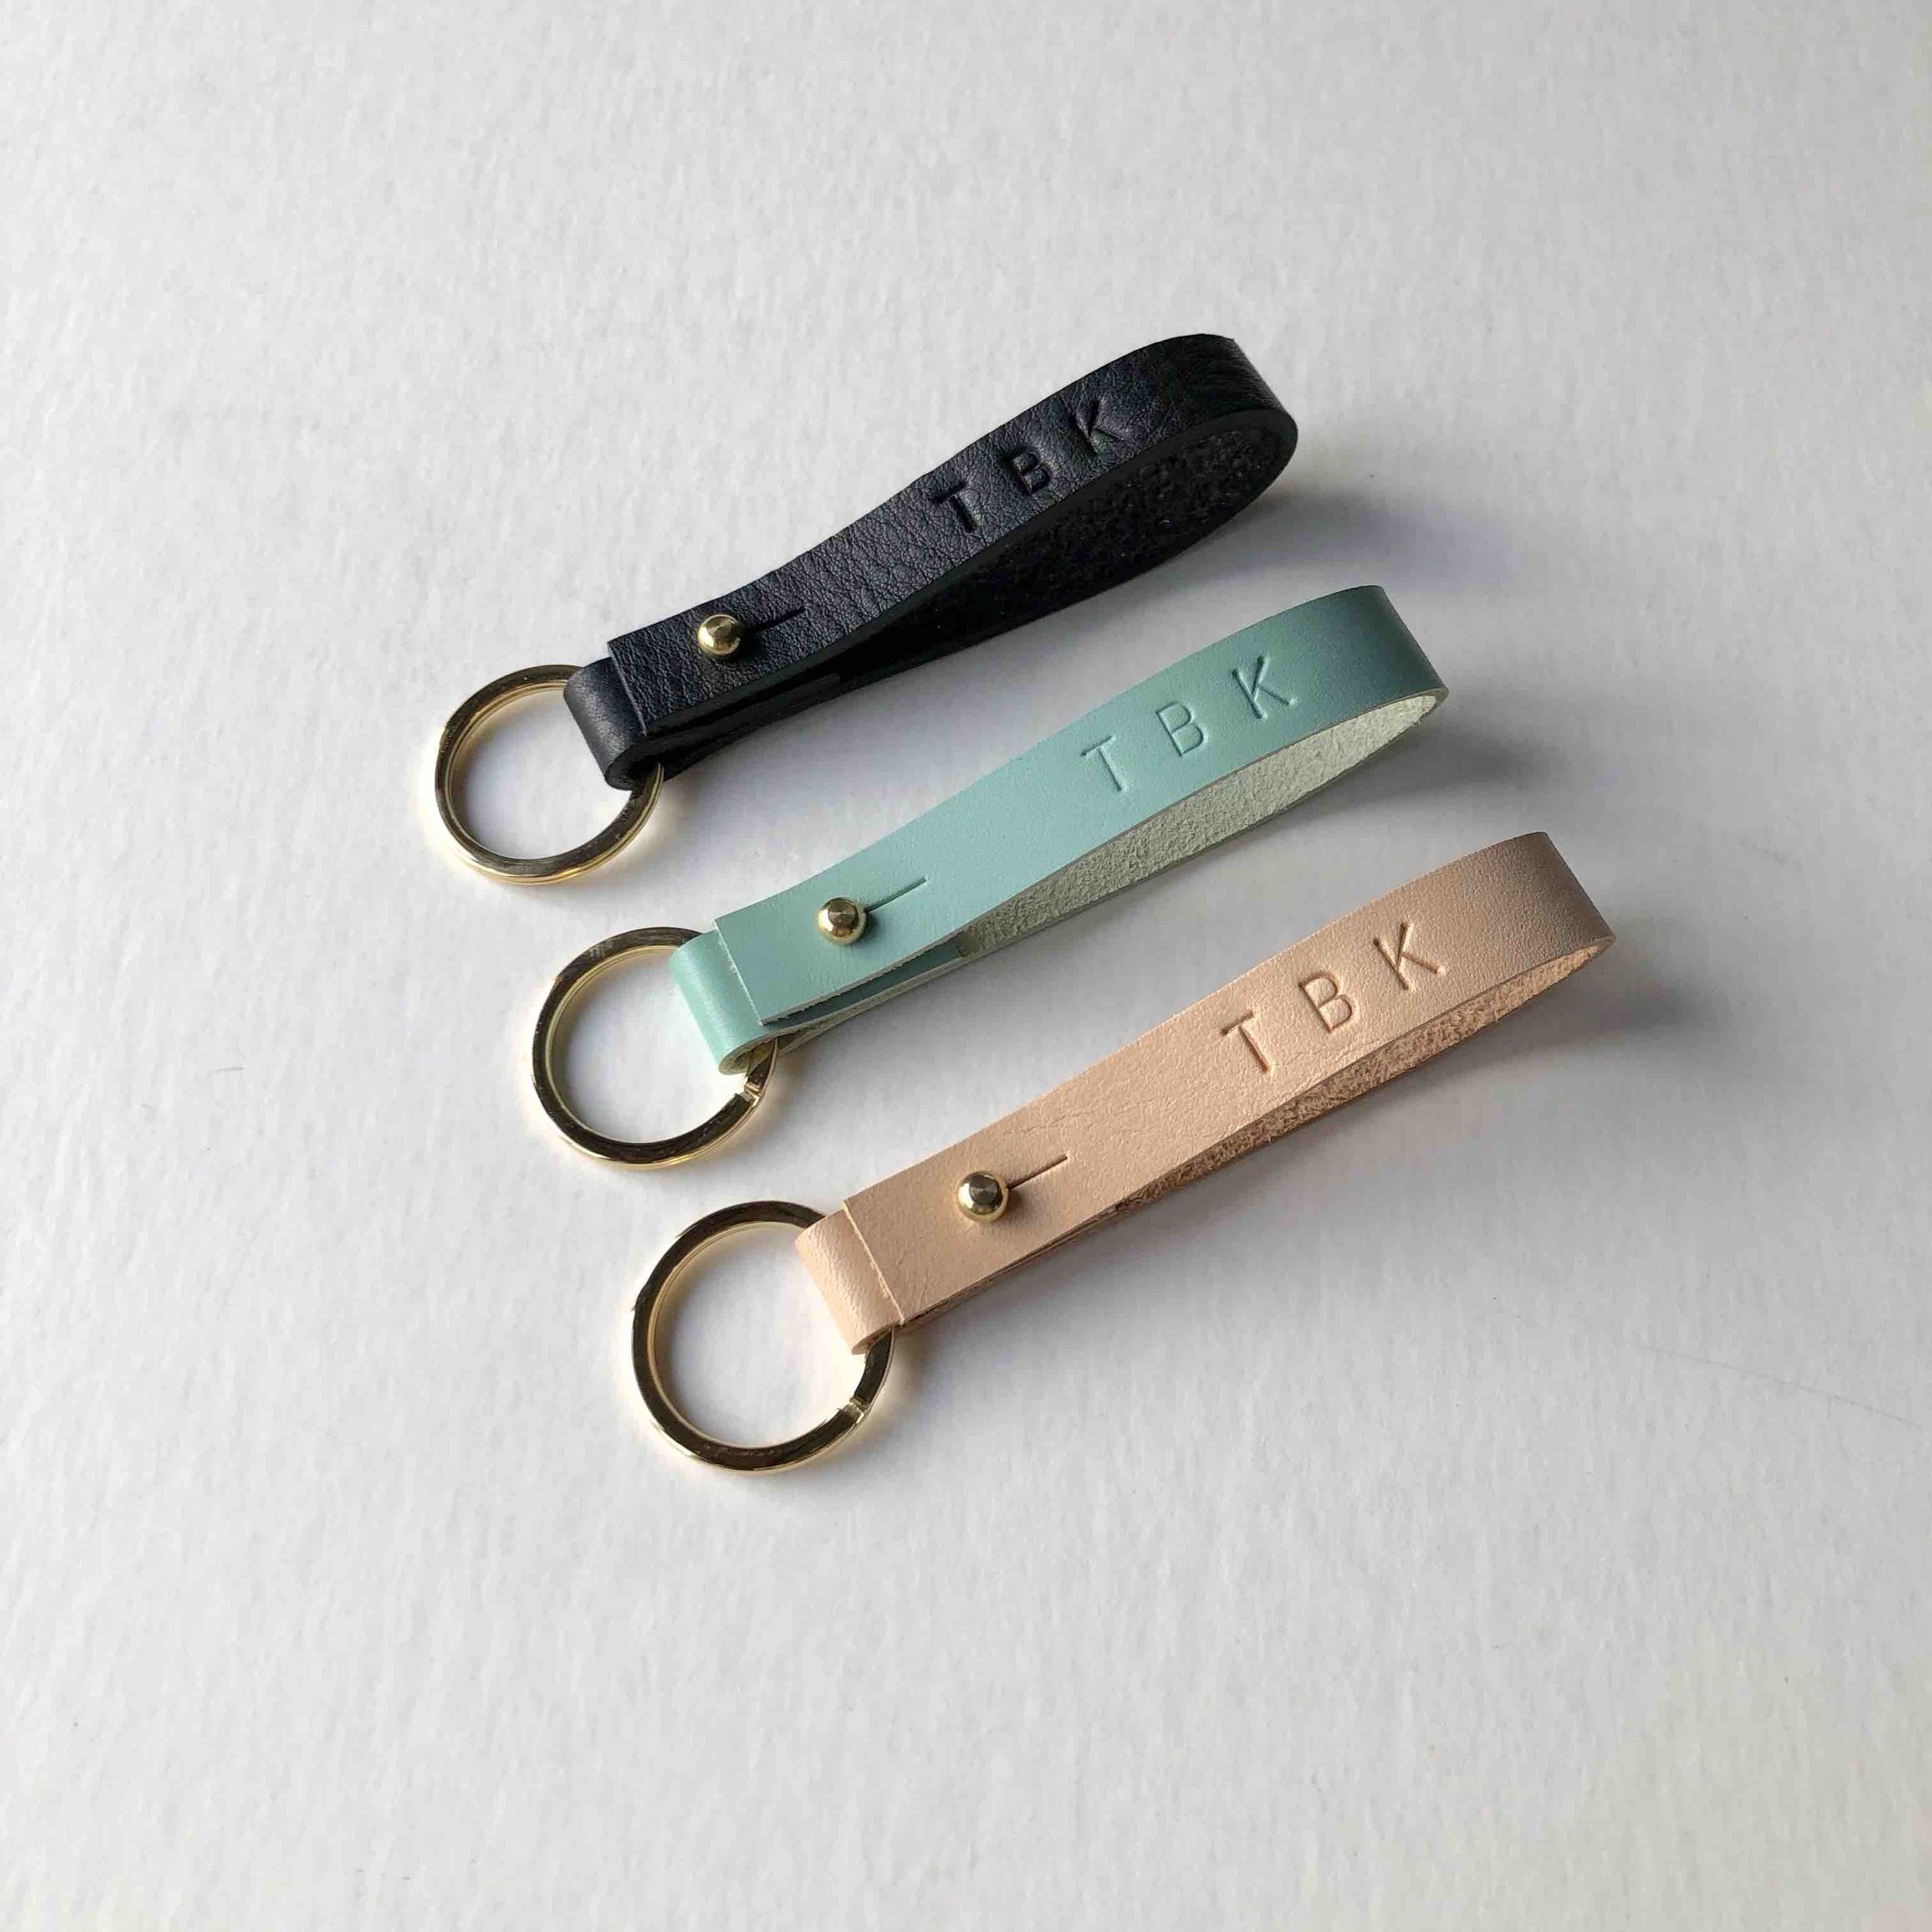 CARV sustainable leather keyring handmade in the UK.